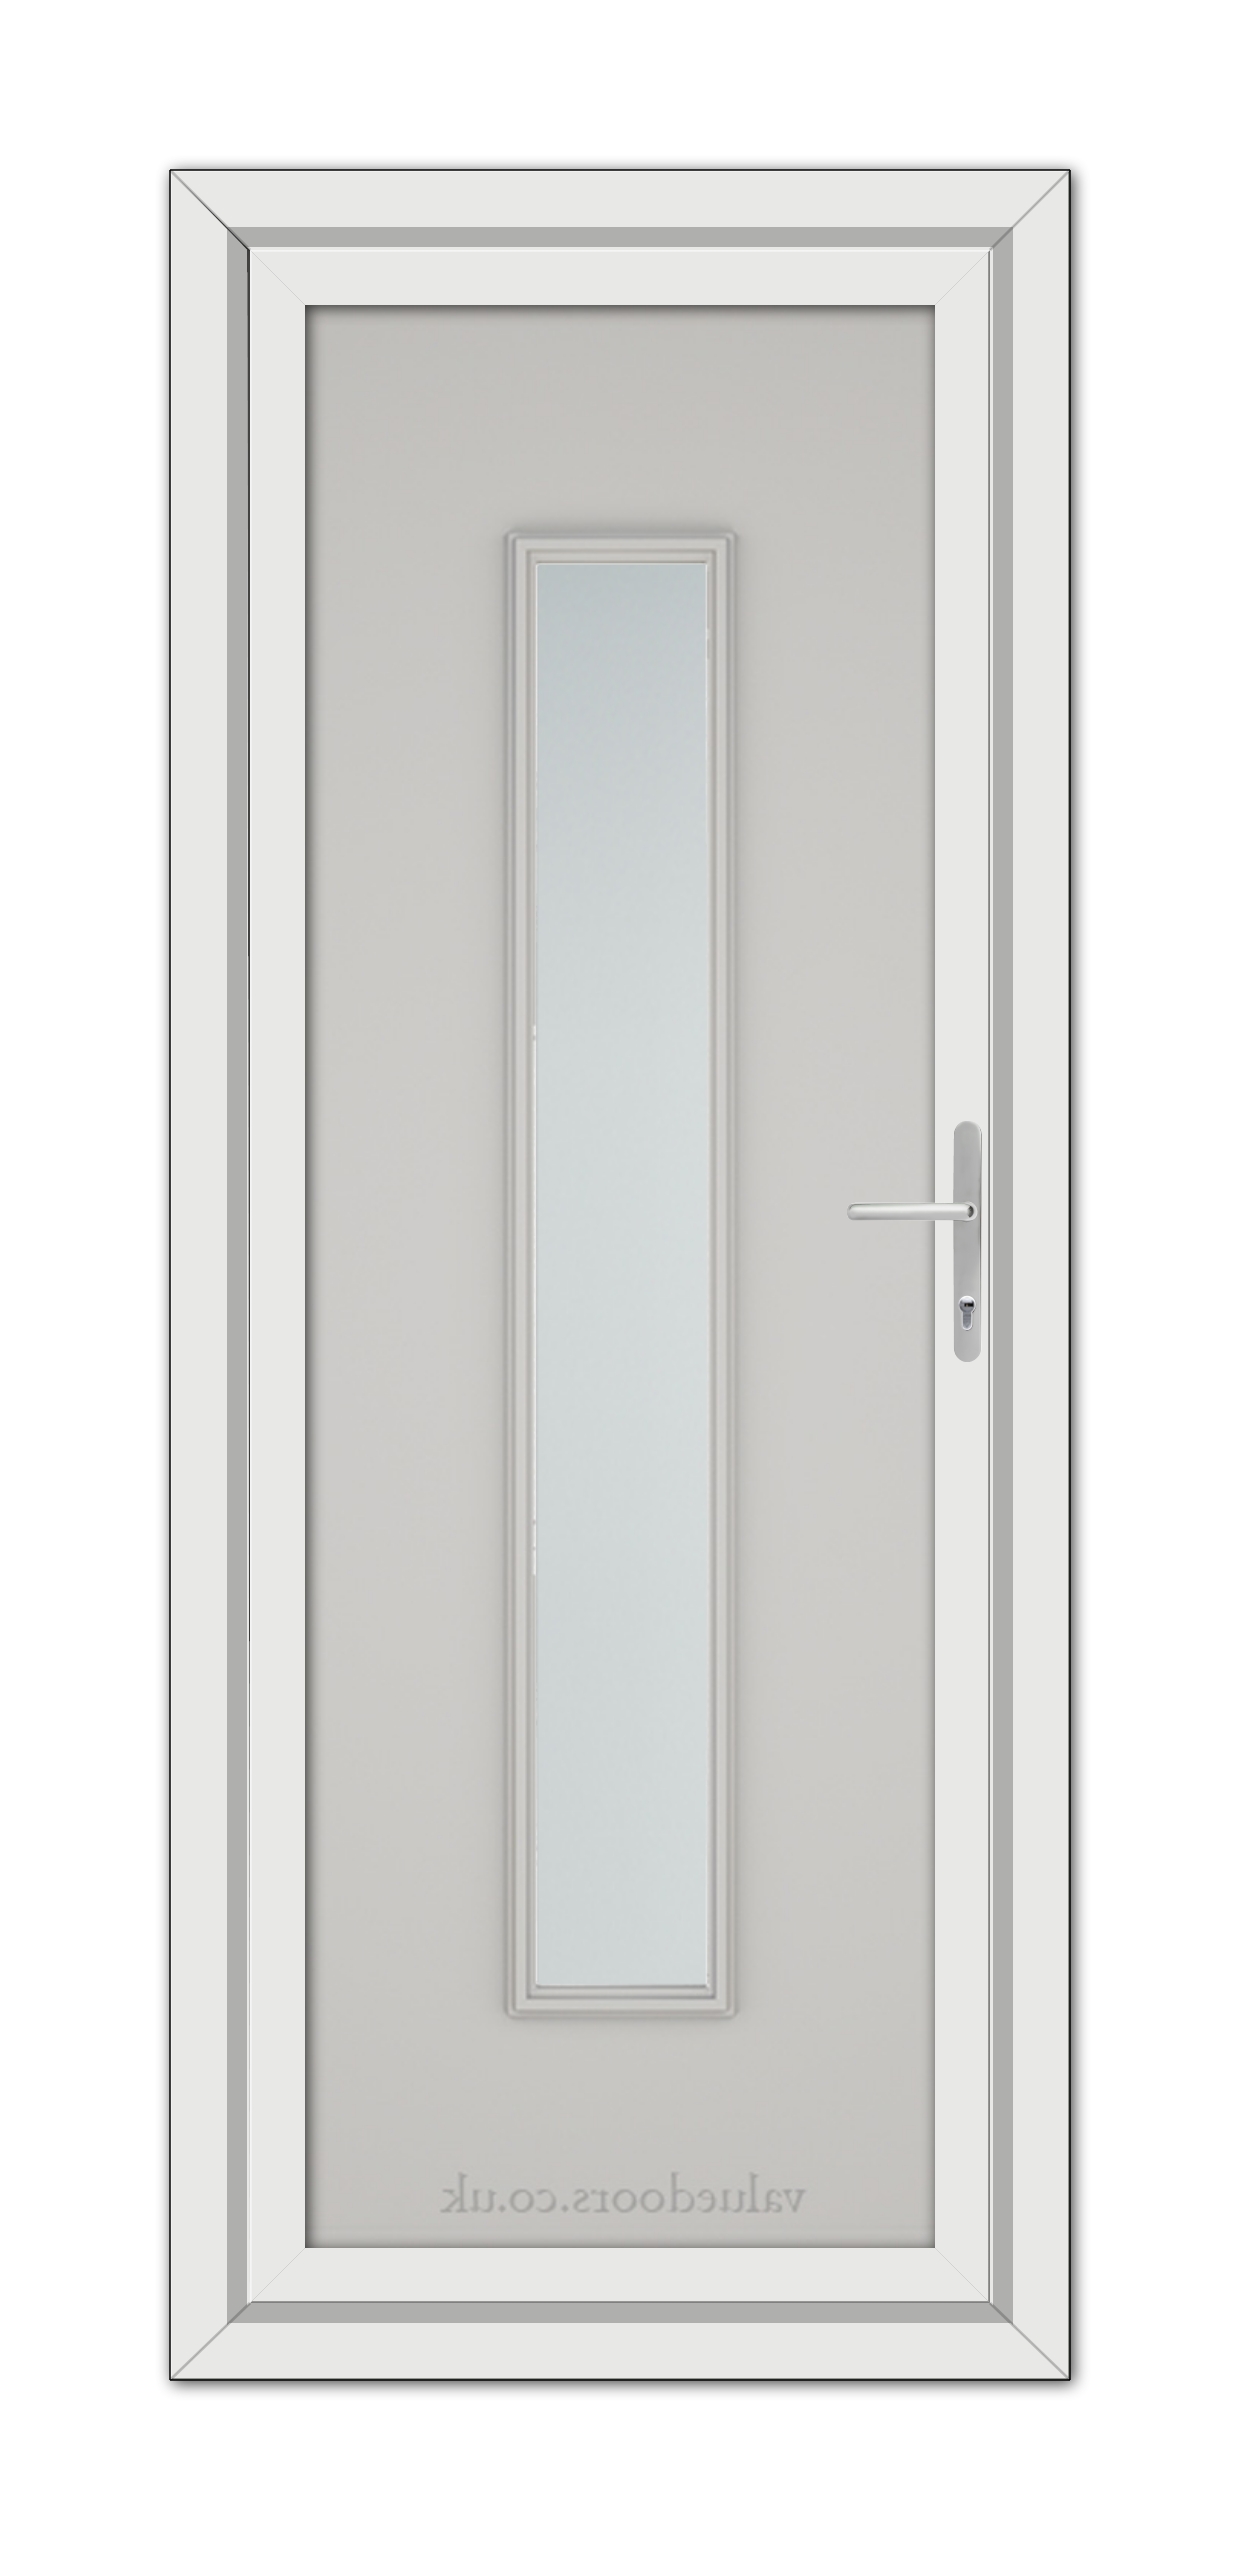 A Silver Grey Rome uPVC Door with a glass panel.